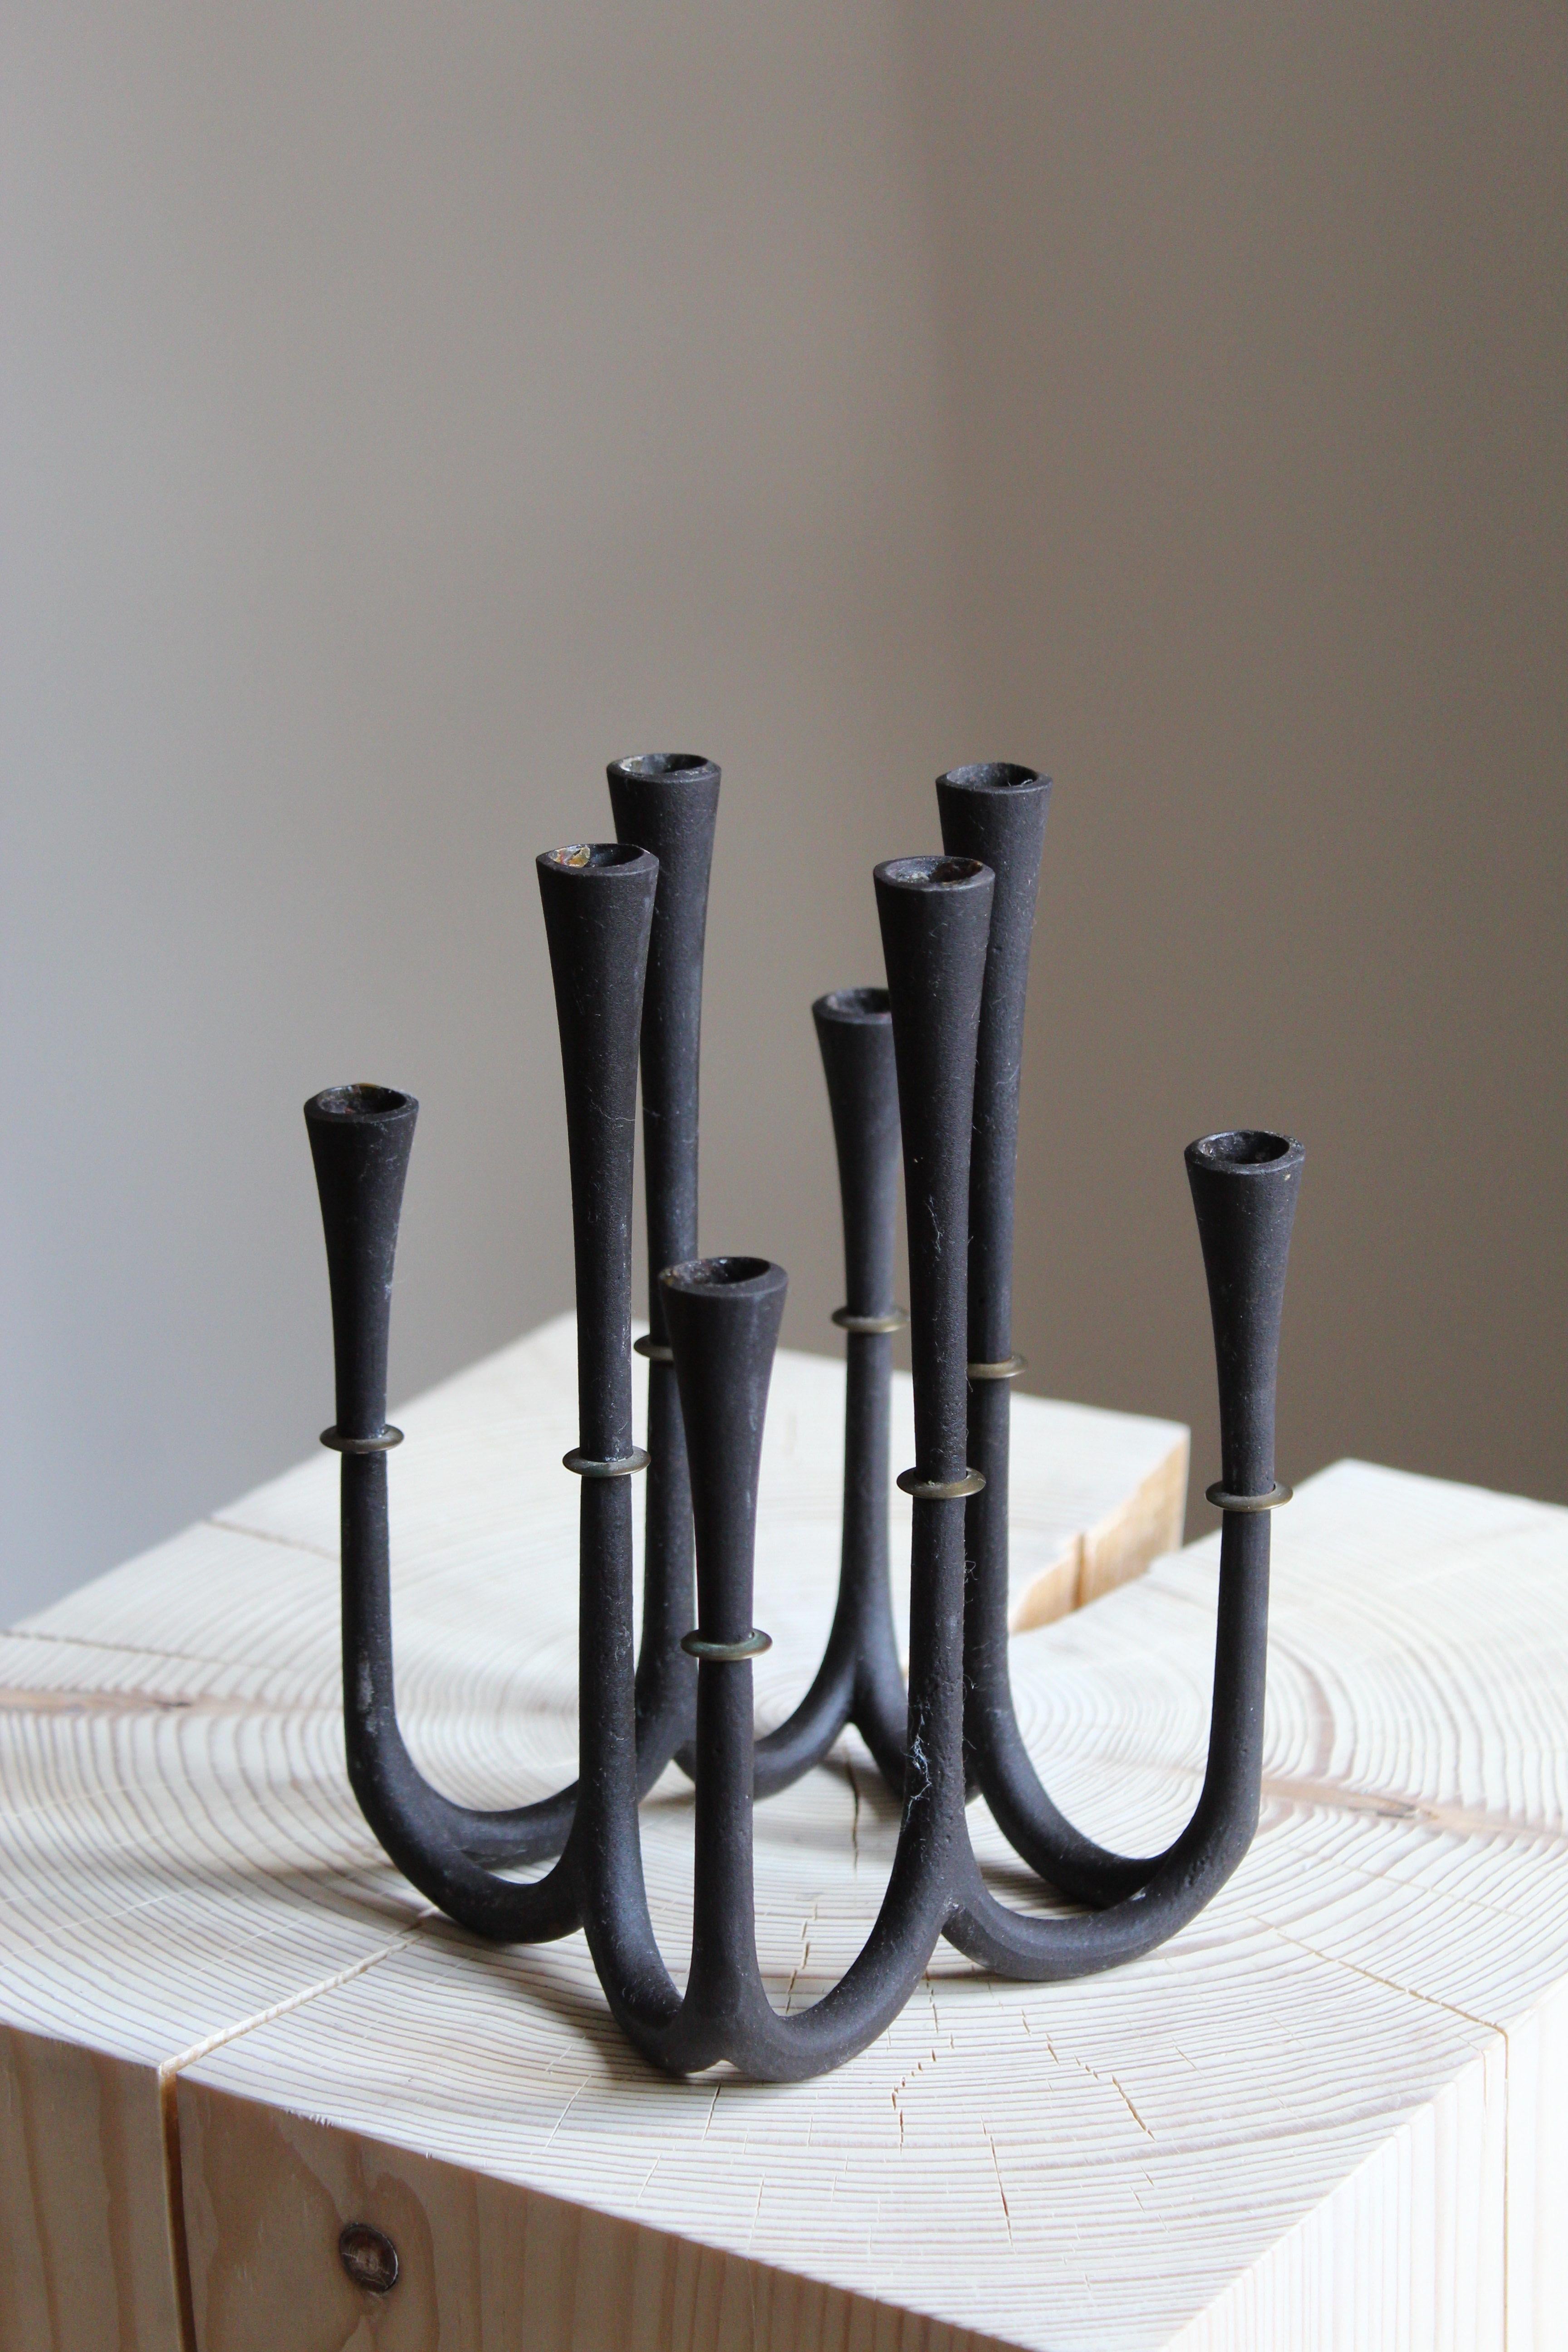 A sculptural candelabra designed and produced by Danish sculptor Jens Quistgaard. For small candles.